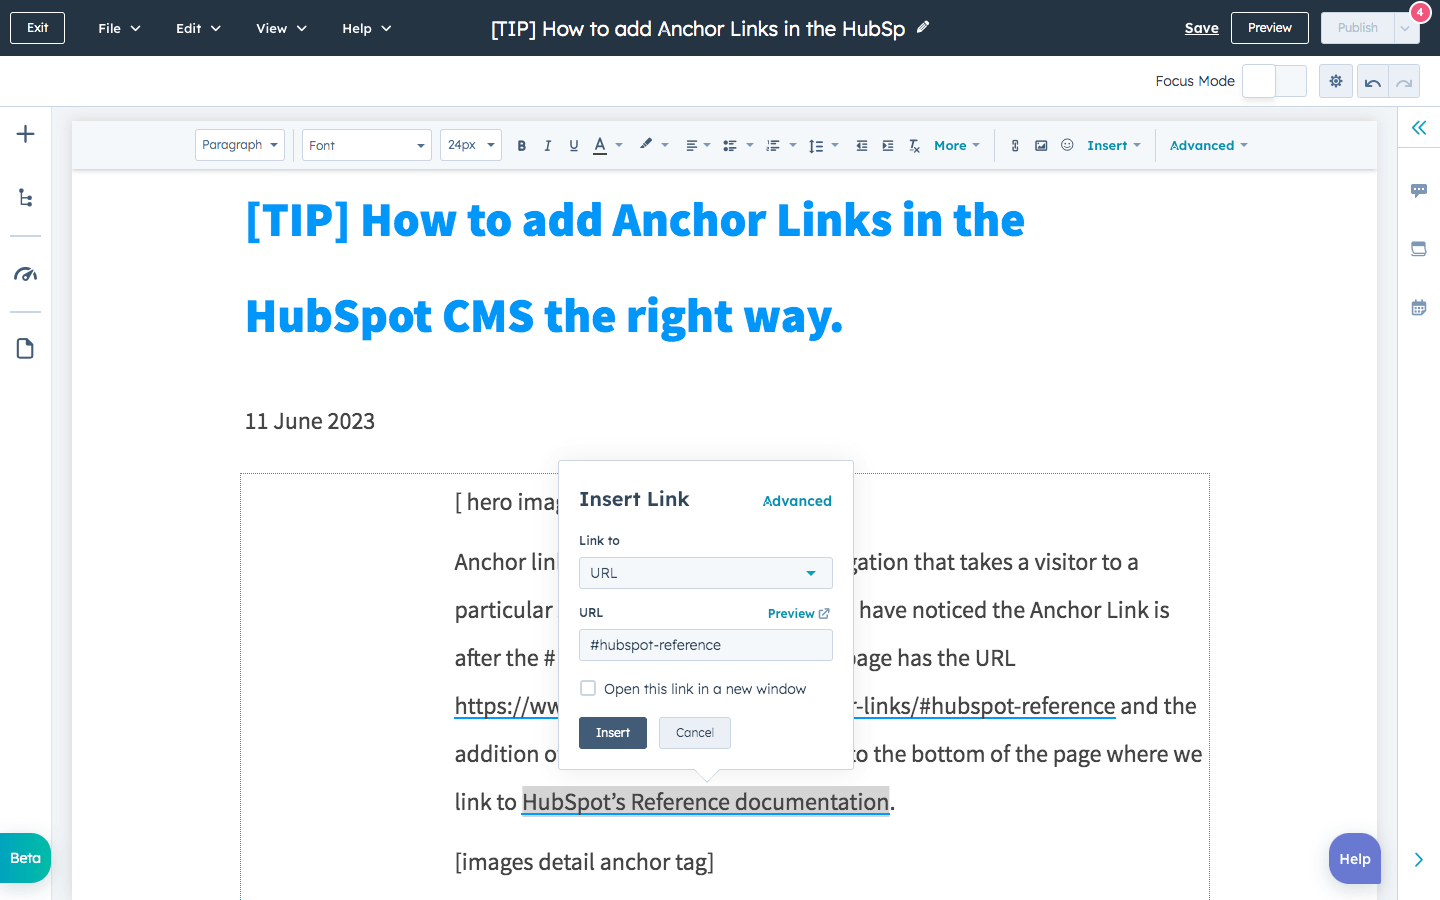 How to add Anchor Links in the HubSpot CMS the right way.